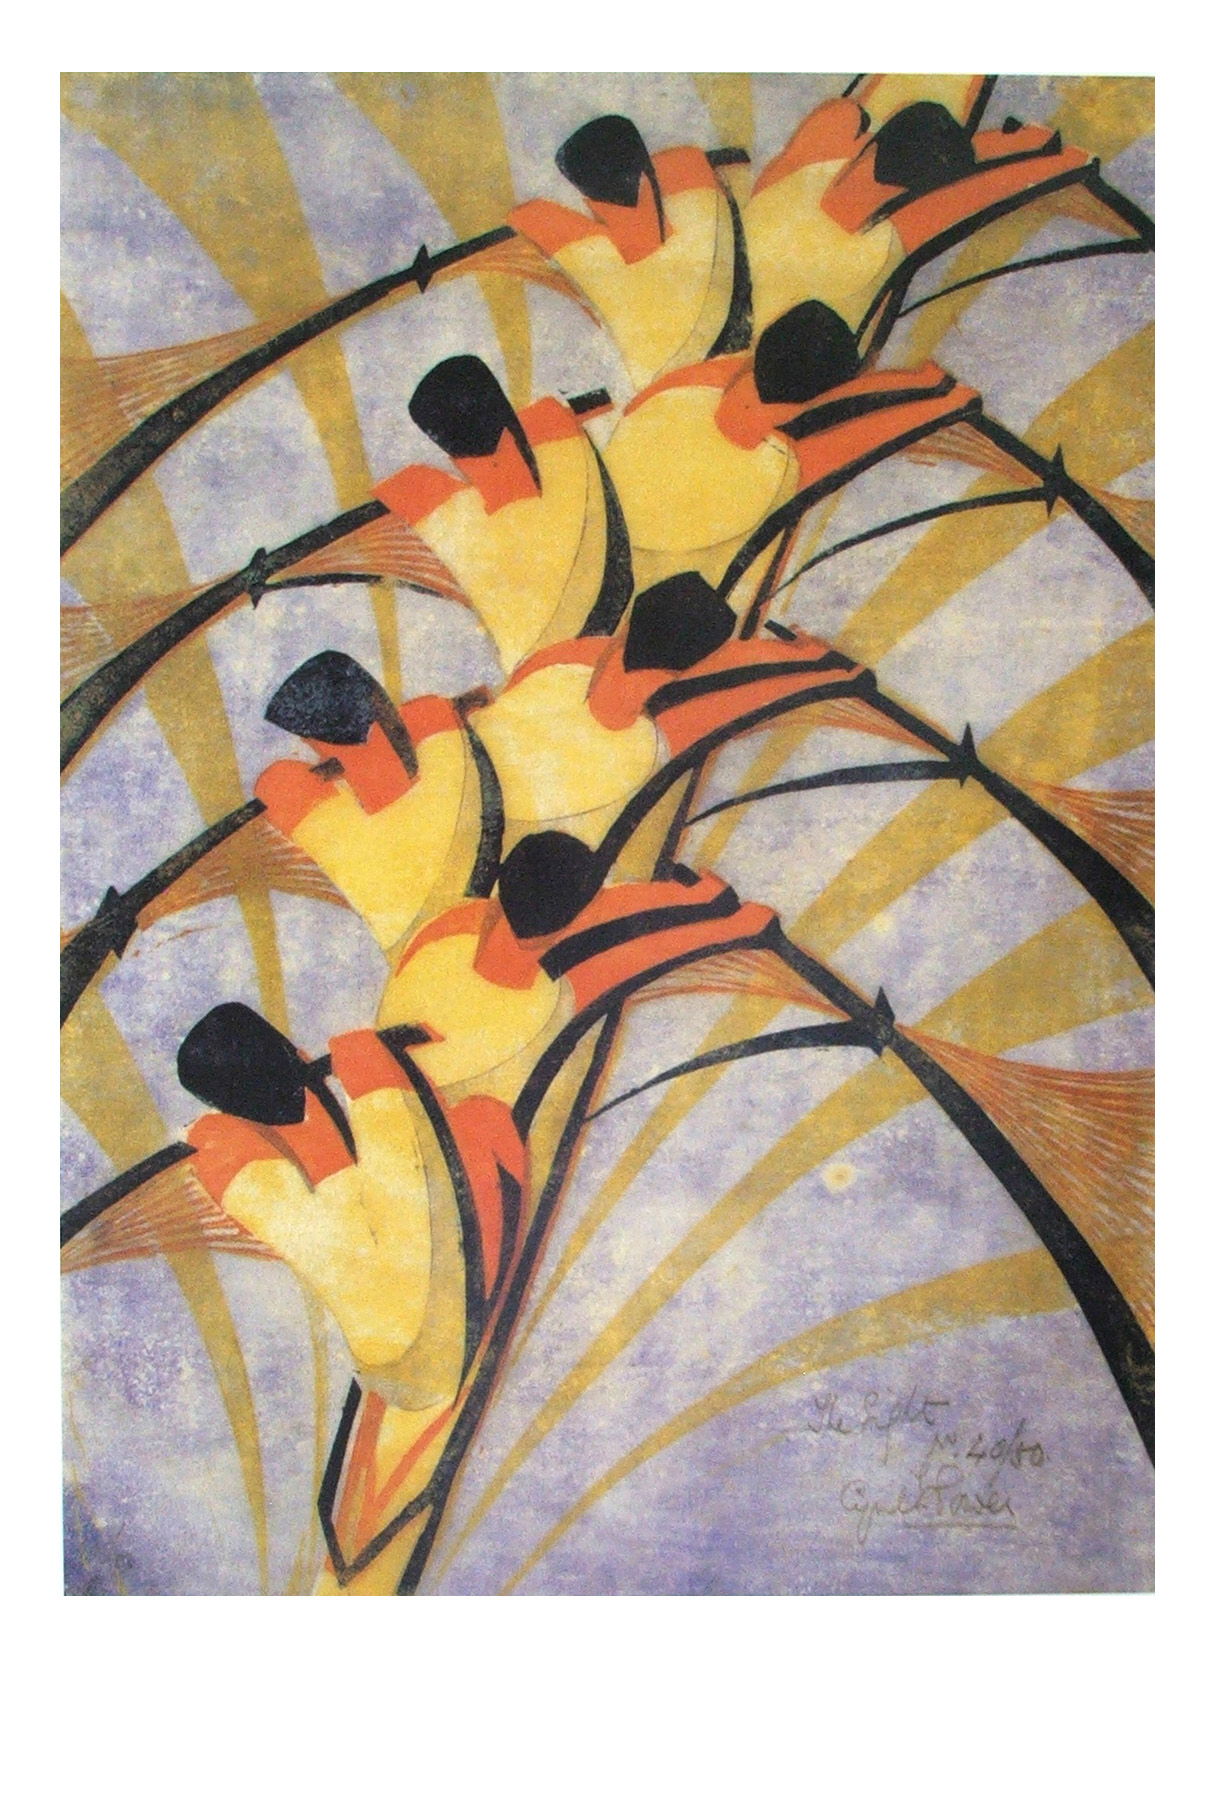 The Eight, 1930 by Cyril E. Power | Classic Prints